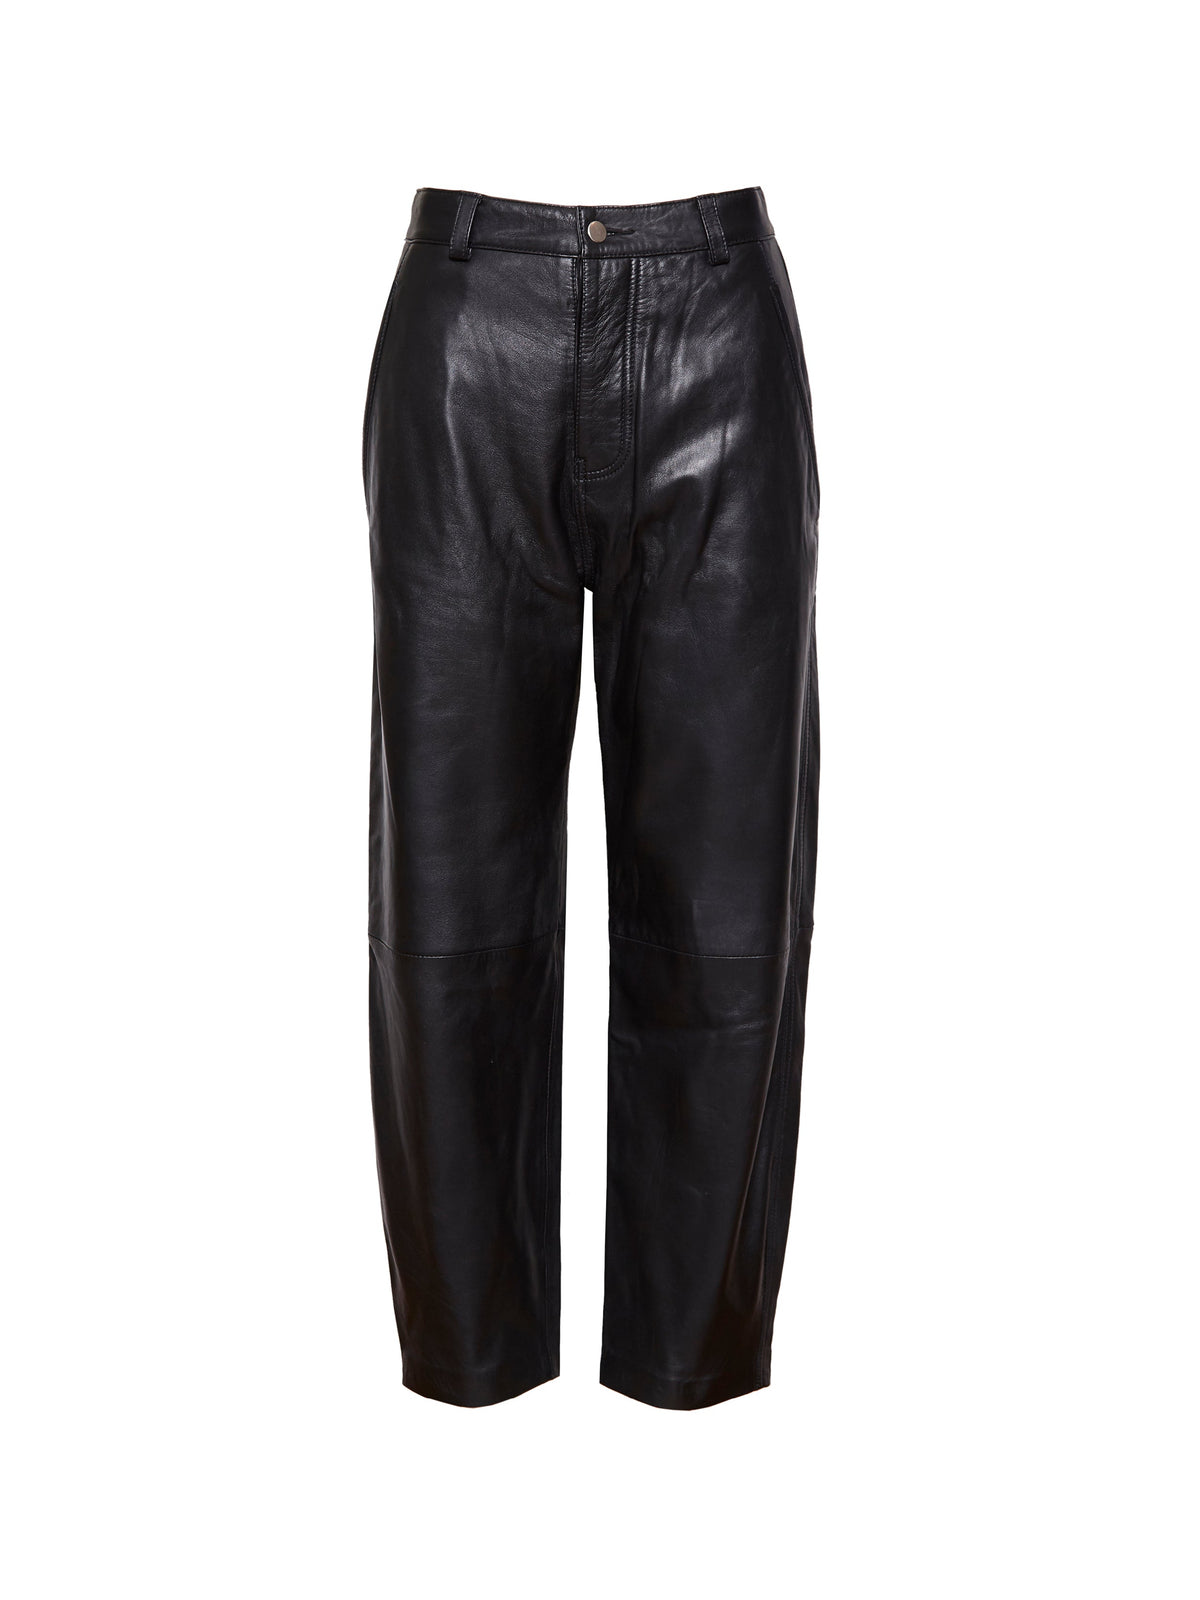 BUICK LEATHER PANT | BLACK